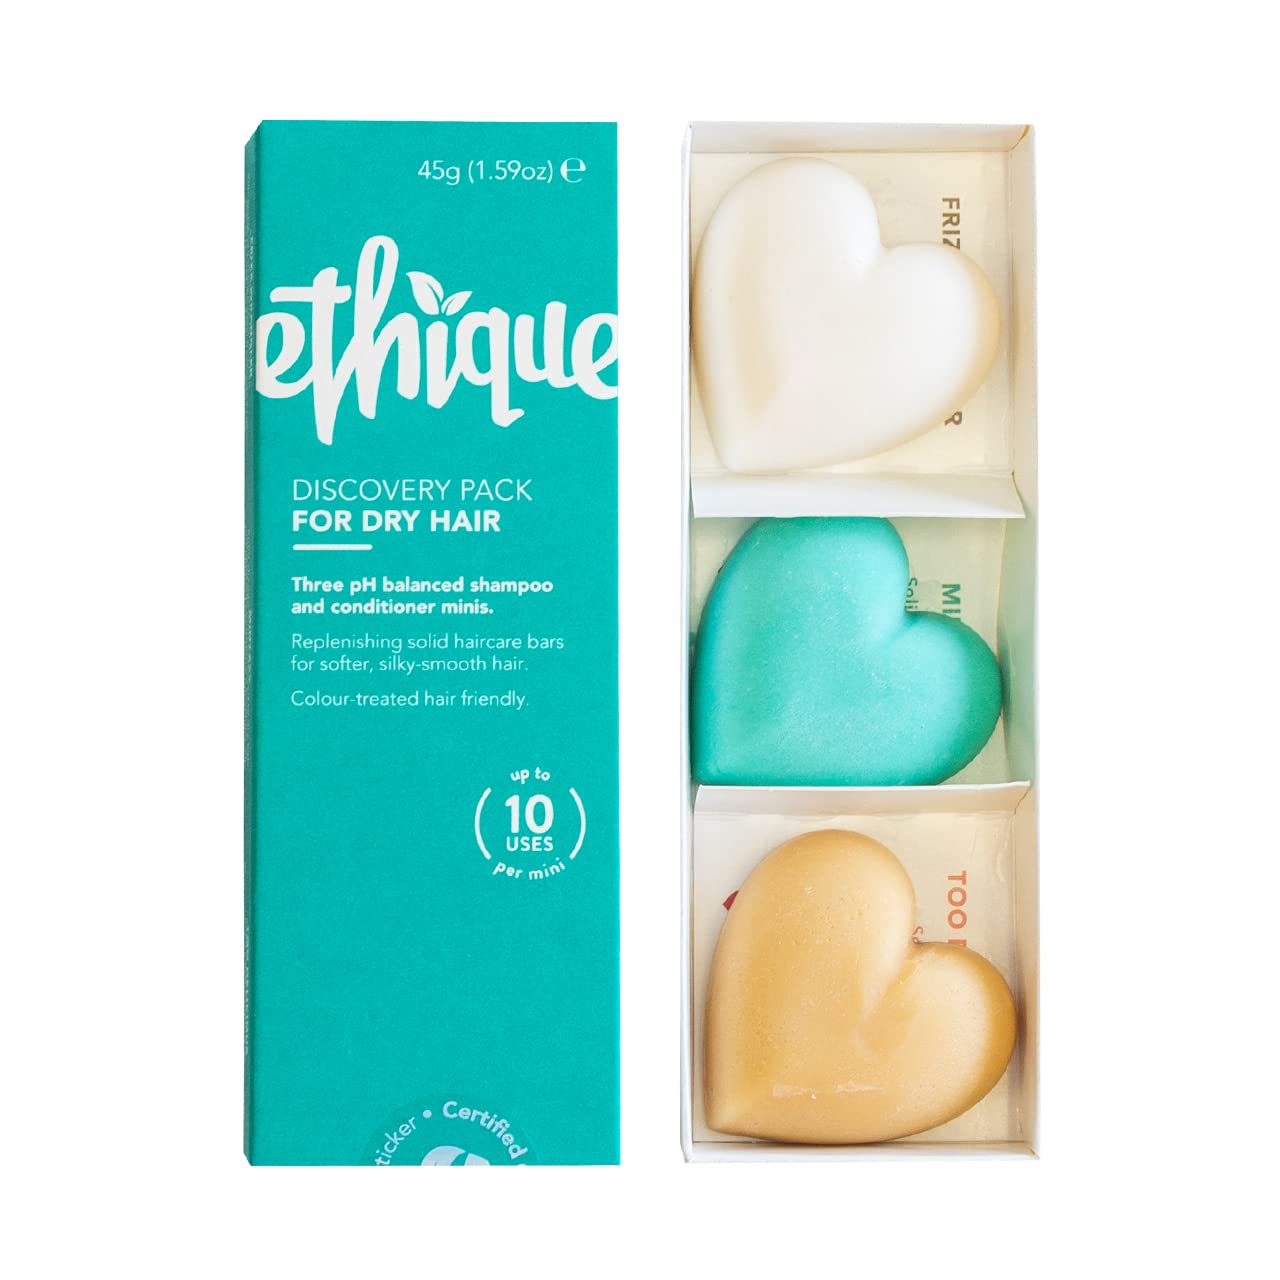 Ethique Discovery Pack for Dry Hair - Shampoo & Conditioner - Plastic-Free, Vegan, Cruelty-Free, Eco-Friendly, 3 Travel Bars, 1.59 oz (Pack of 1)